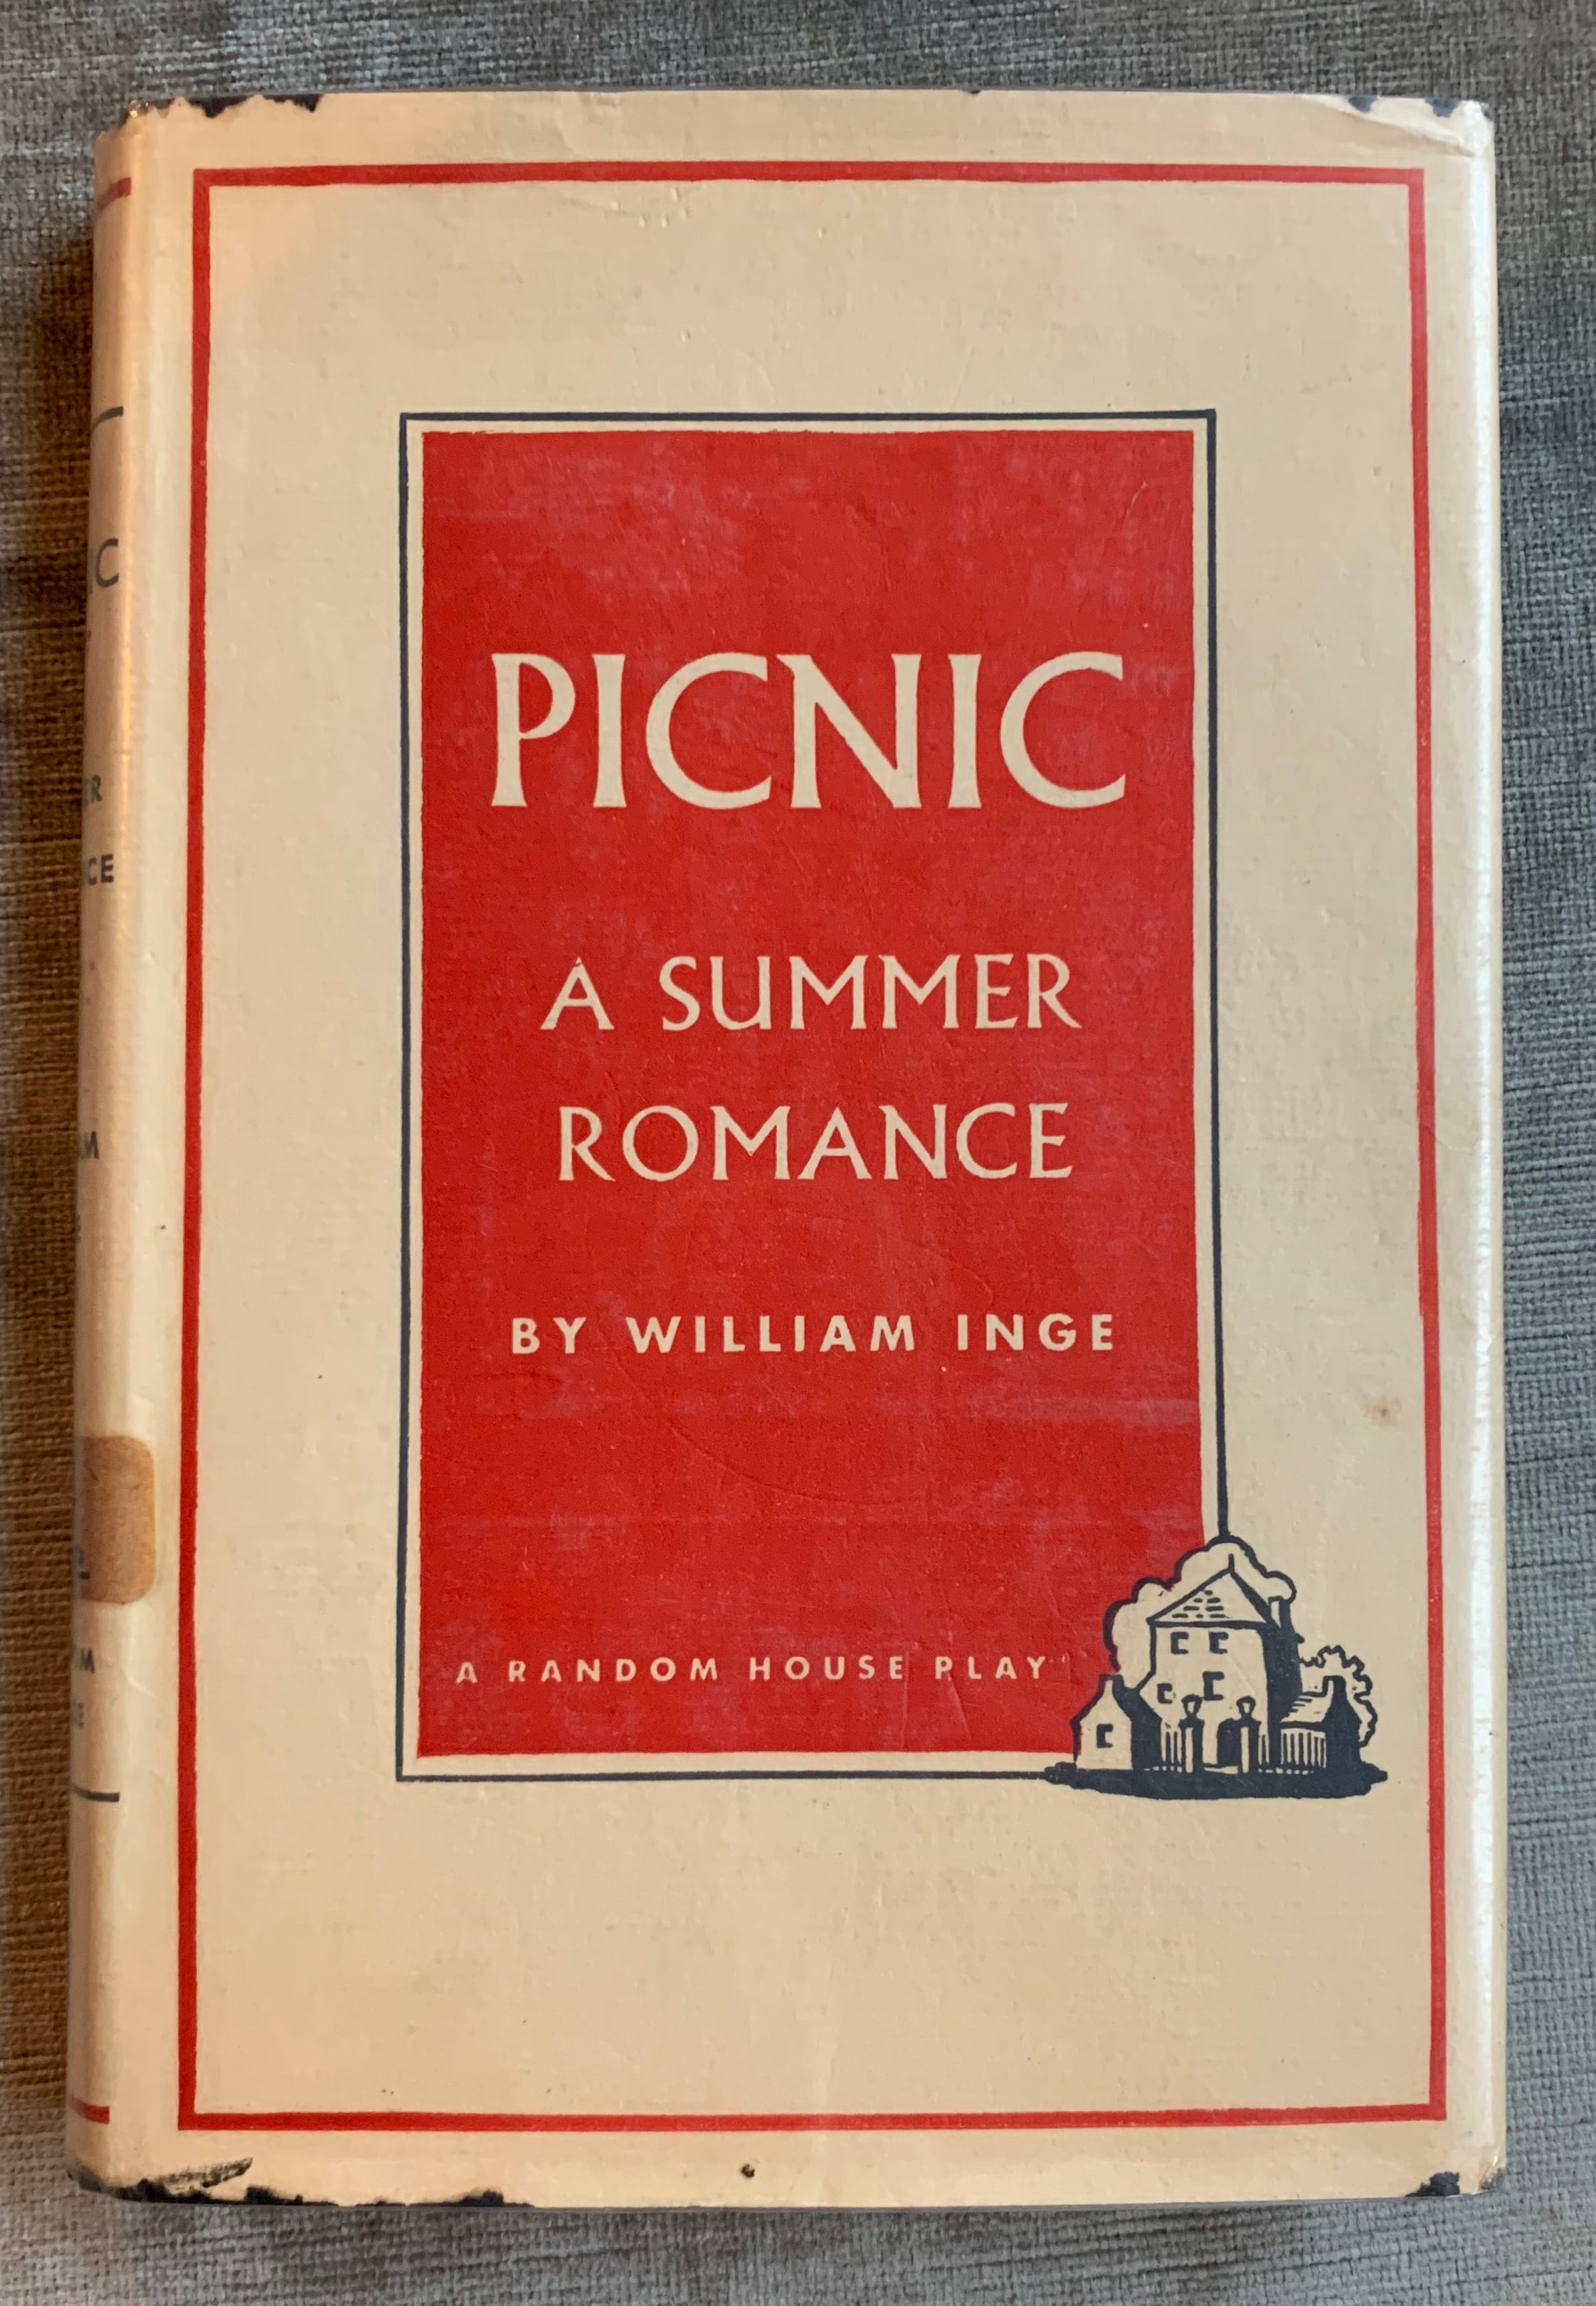 "Picnic a Summer Romance" by William Inge 1953 First Edition